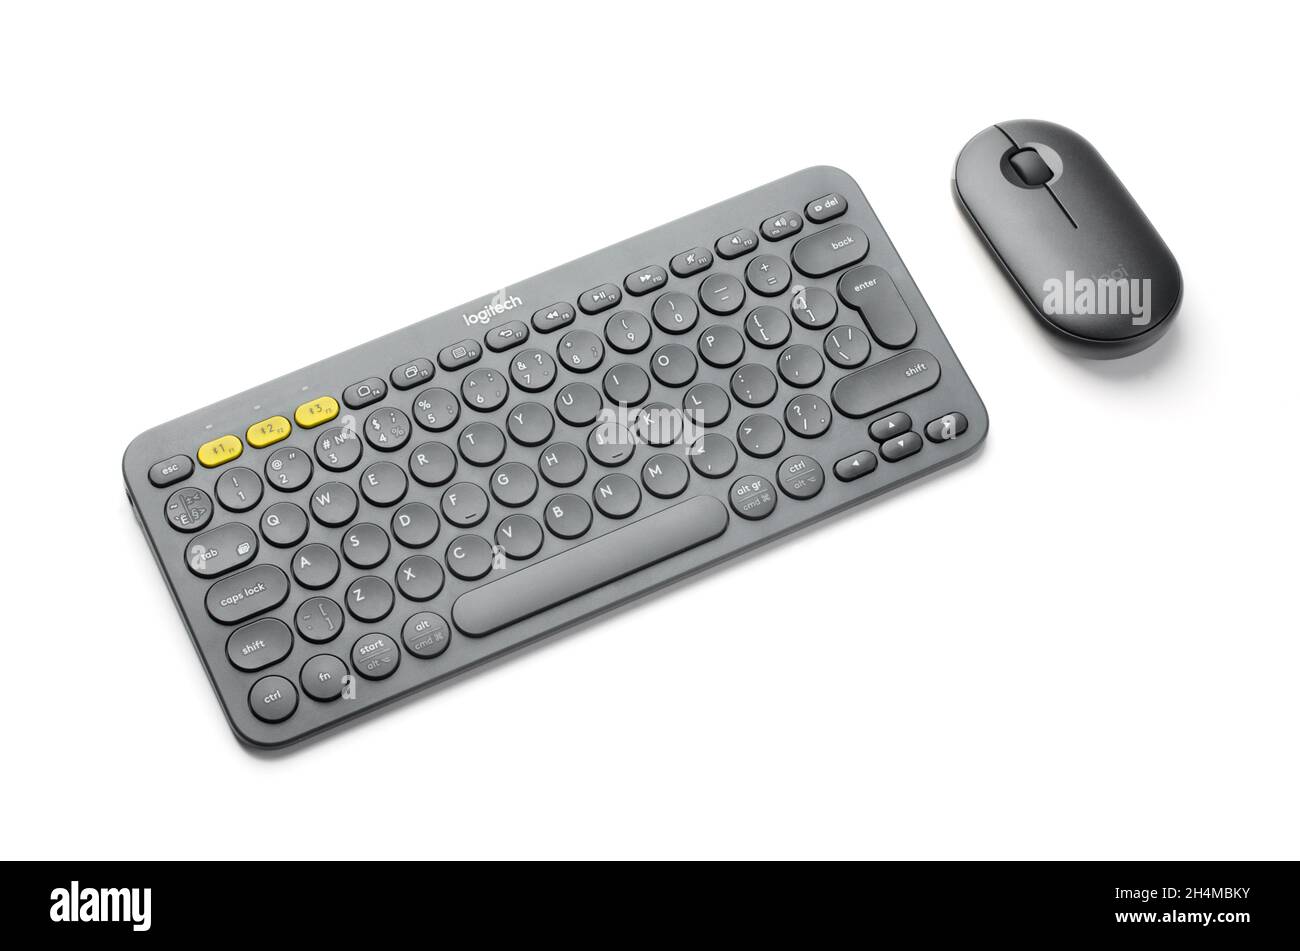 SAMARA, RUSSIA - 11 August, 2021 - Keyboard K380 and Mouse M350 Logitech isolated on a white background Stock Photo